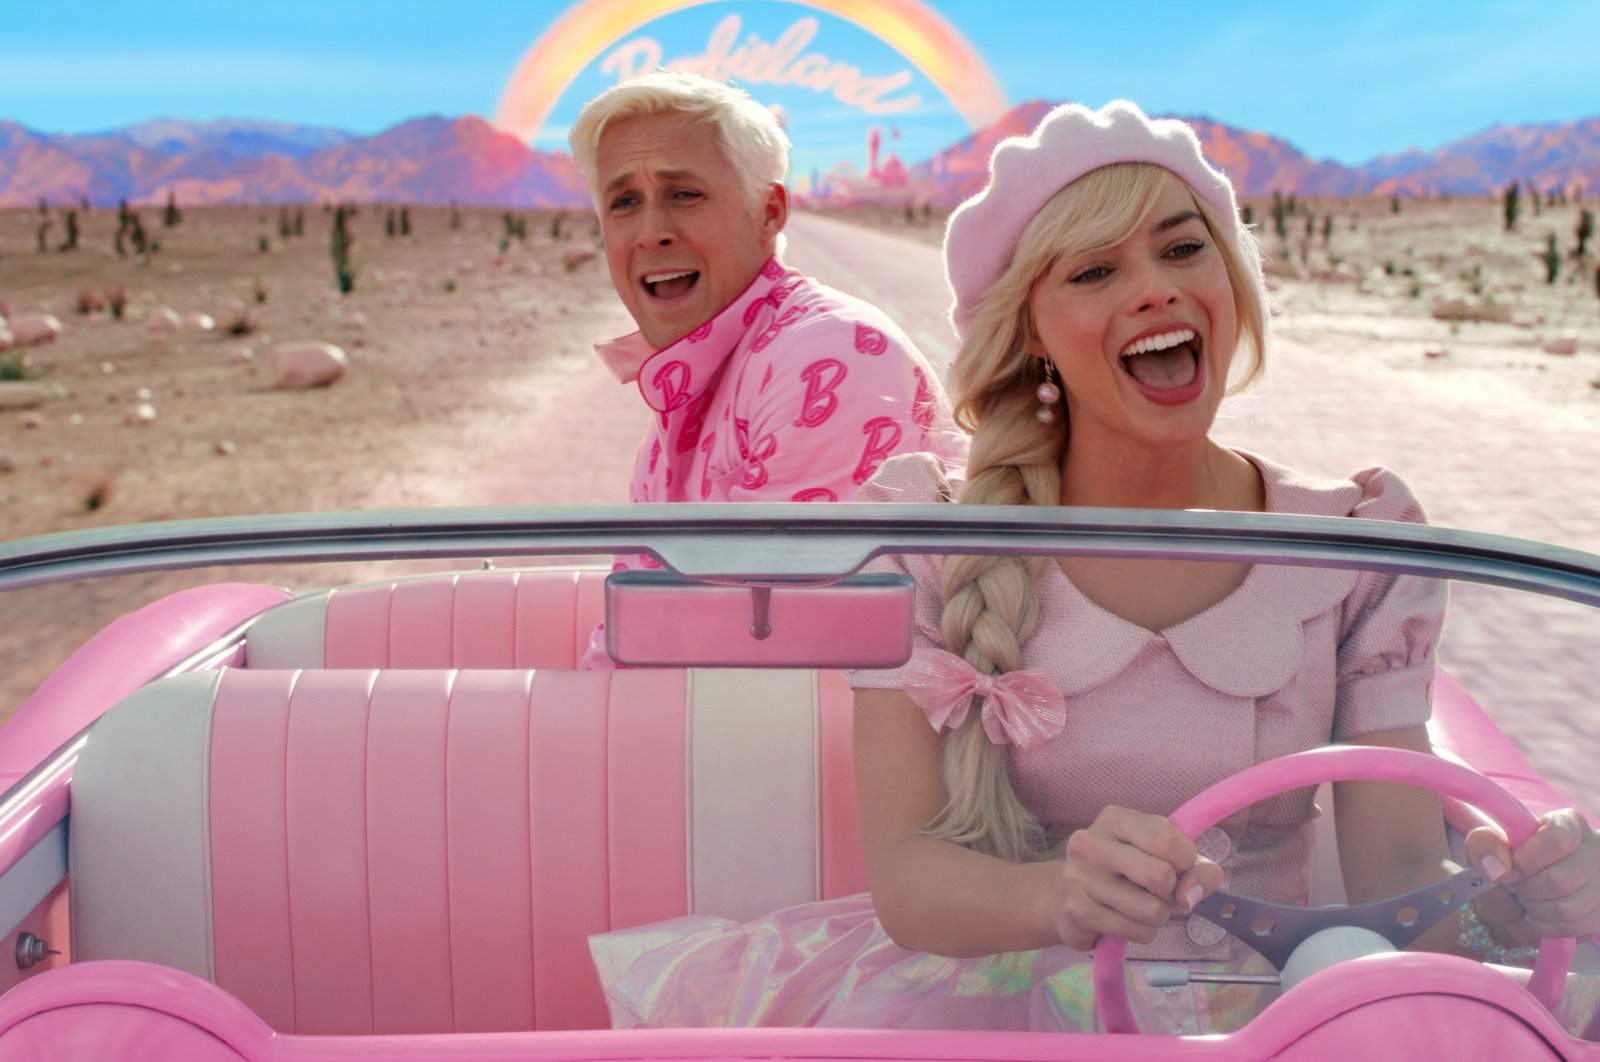 A still shot from the movie &quot;Barbie&quot; shows Margot Robbie and Ryan Gosling. (Photo courtesy of Warner Bros.)